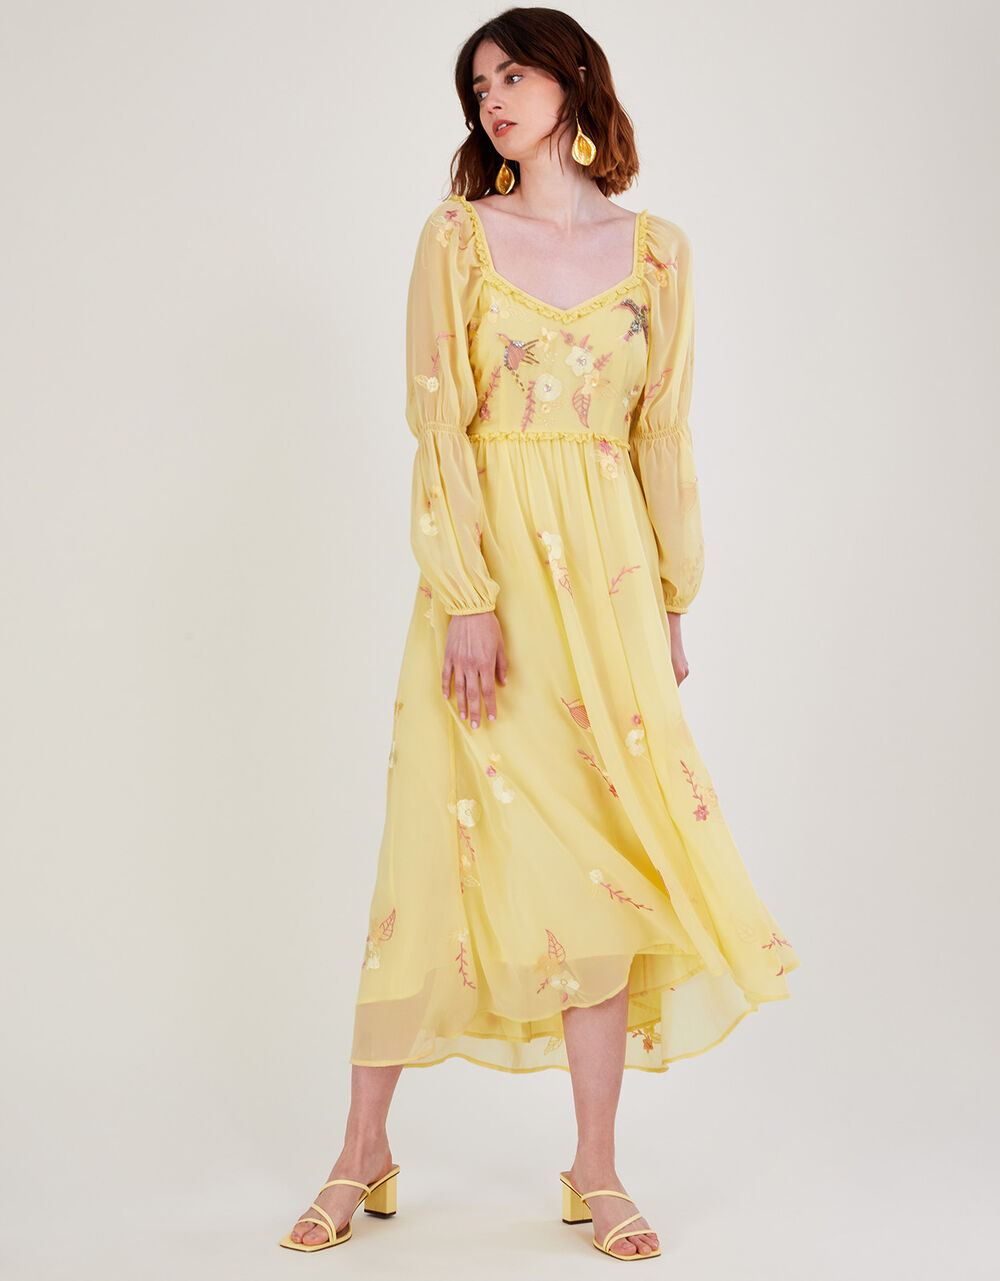 Women Dresses | Heidi Embellished Midi Dress in Recycled Polyester Yellow - RD14961